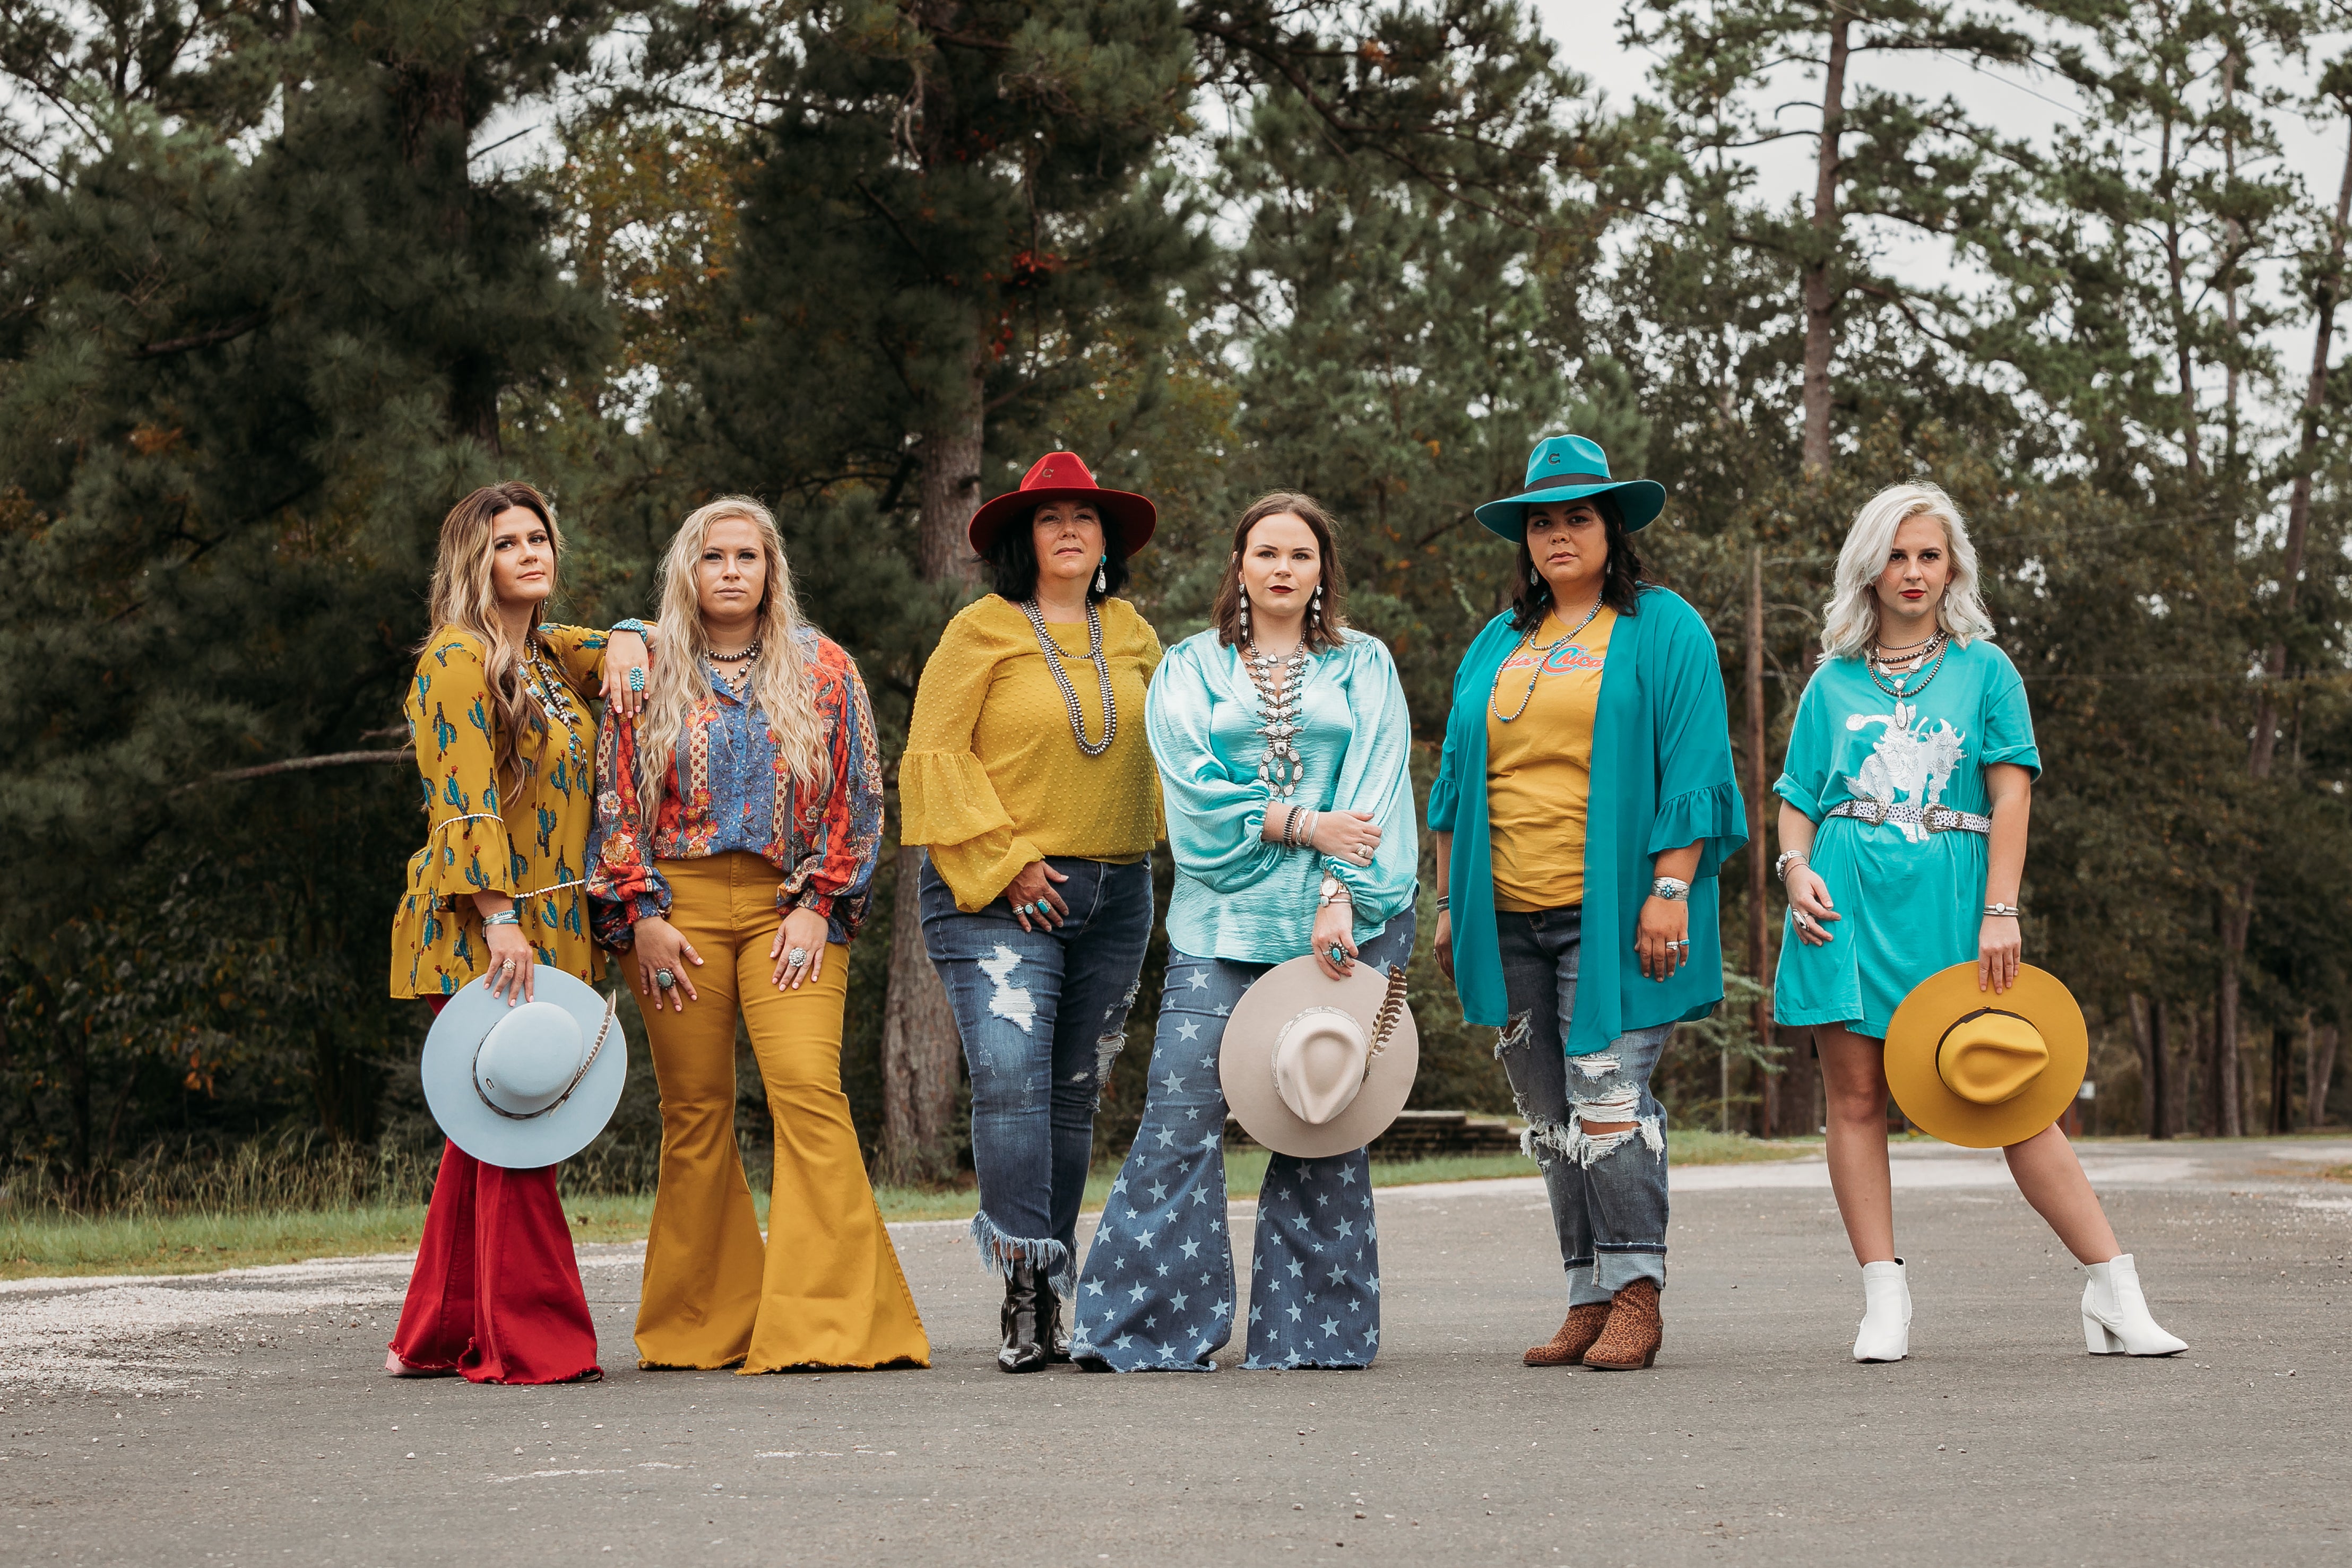 Our Favorite Looks for Rodeo Season